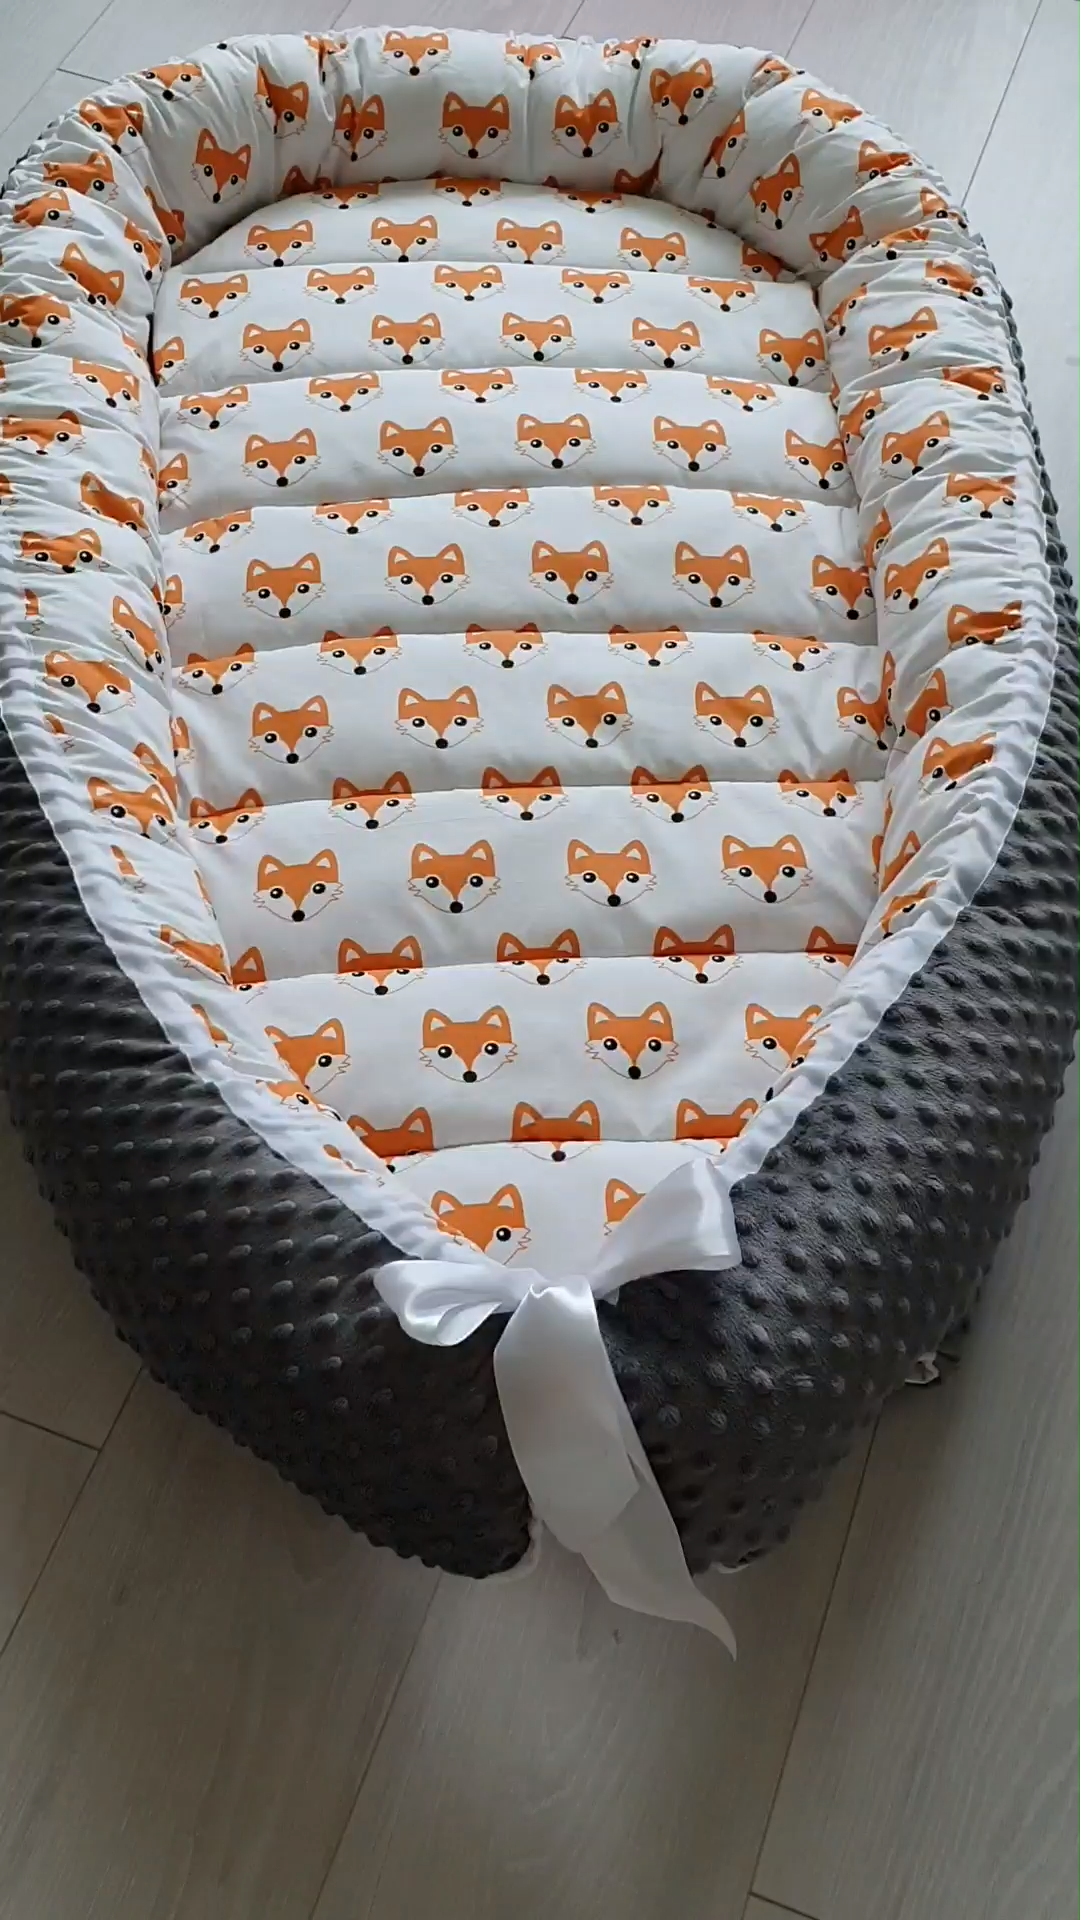 Toddler nest bed Sleeping bed Baby fox print Babynest Snuggle bed Cosleeper Travel bed Baby bedding - Toddler nest bed Sleeping bed Baby fox print Babynest Snuggle bed Cosleeper Travel bed Baby bedding -   diy Baby bassinet